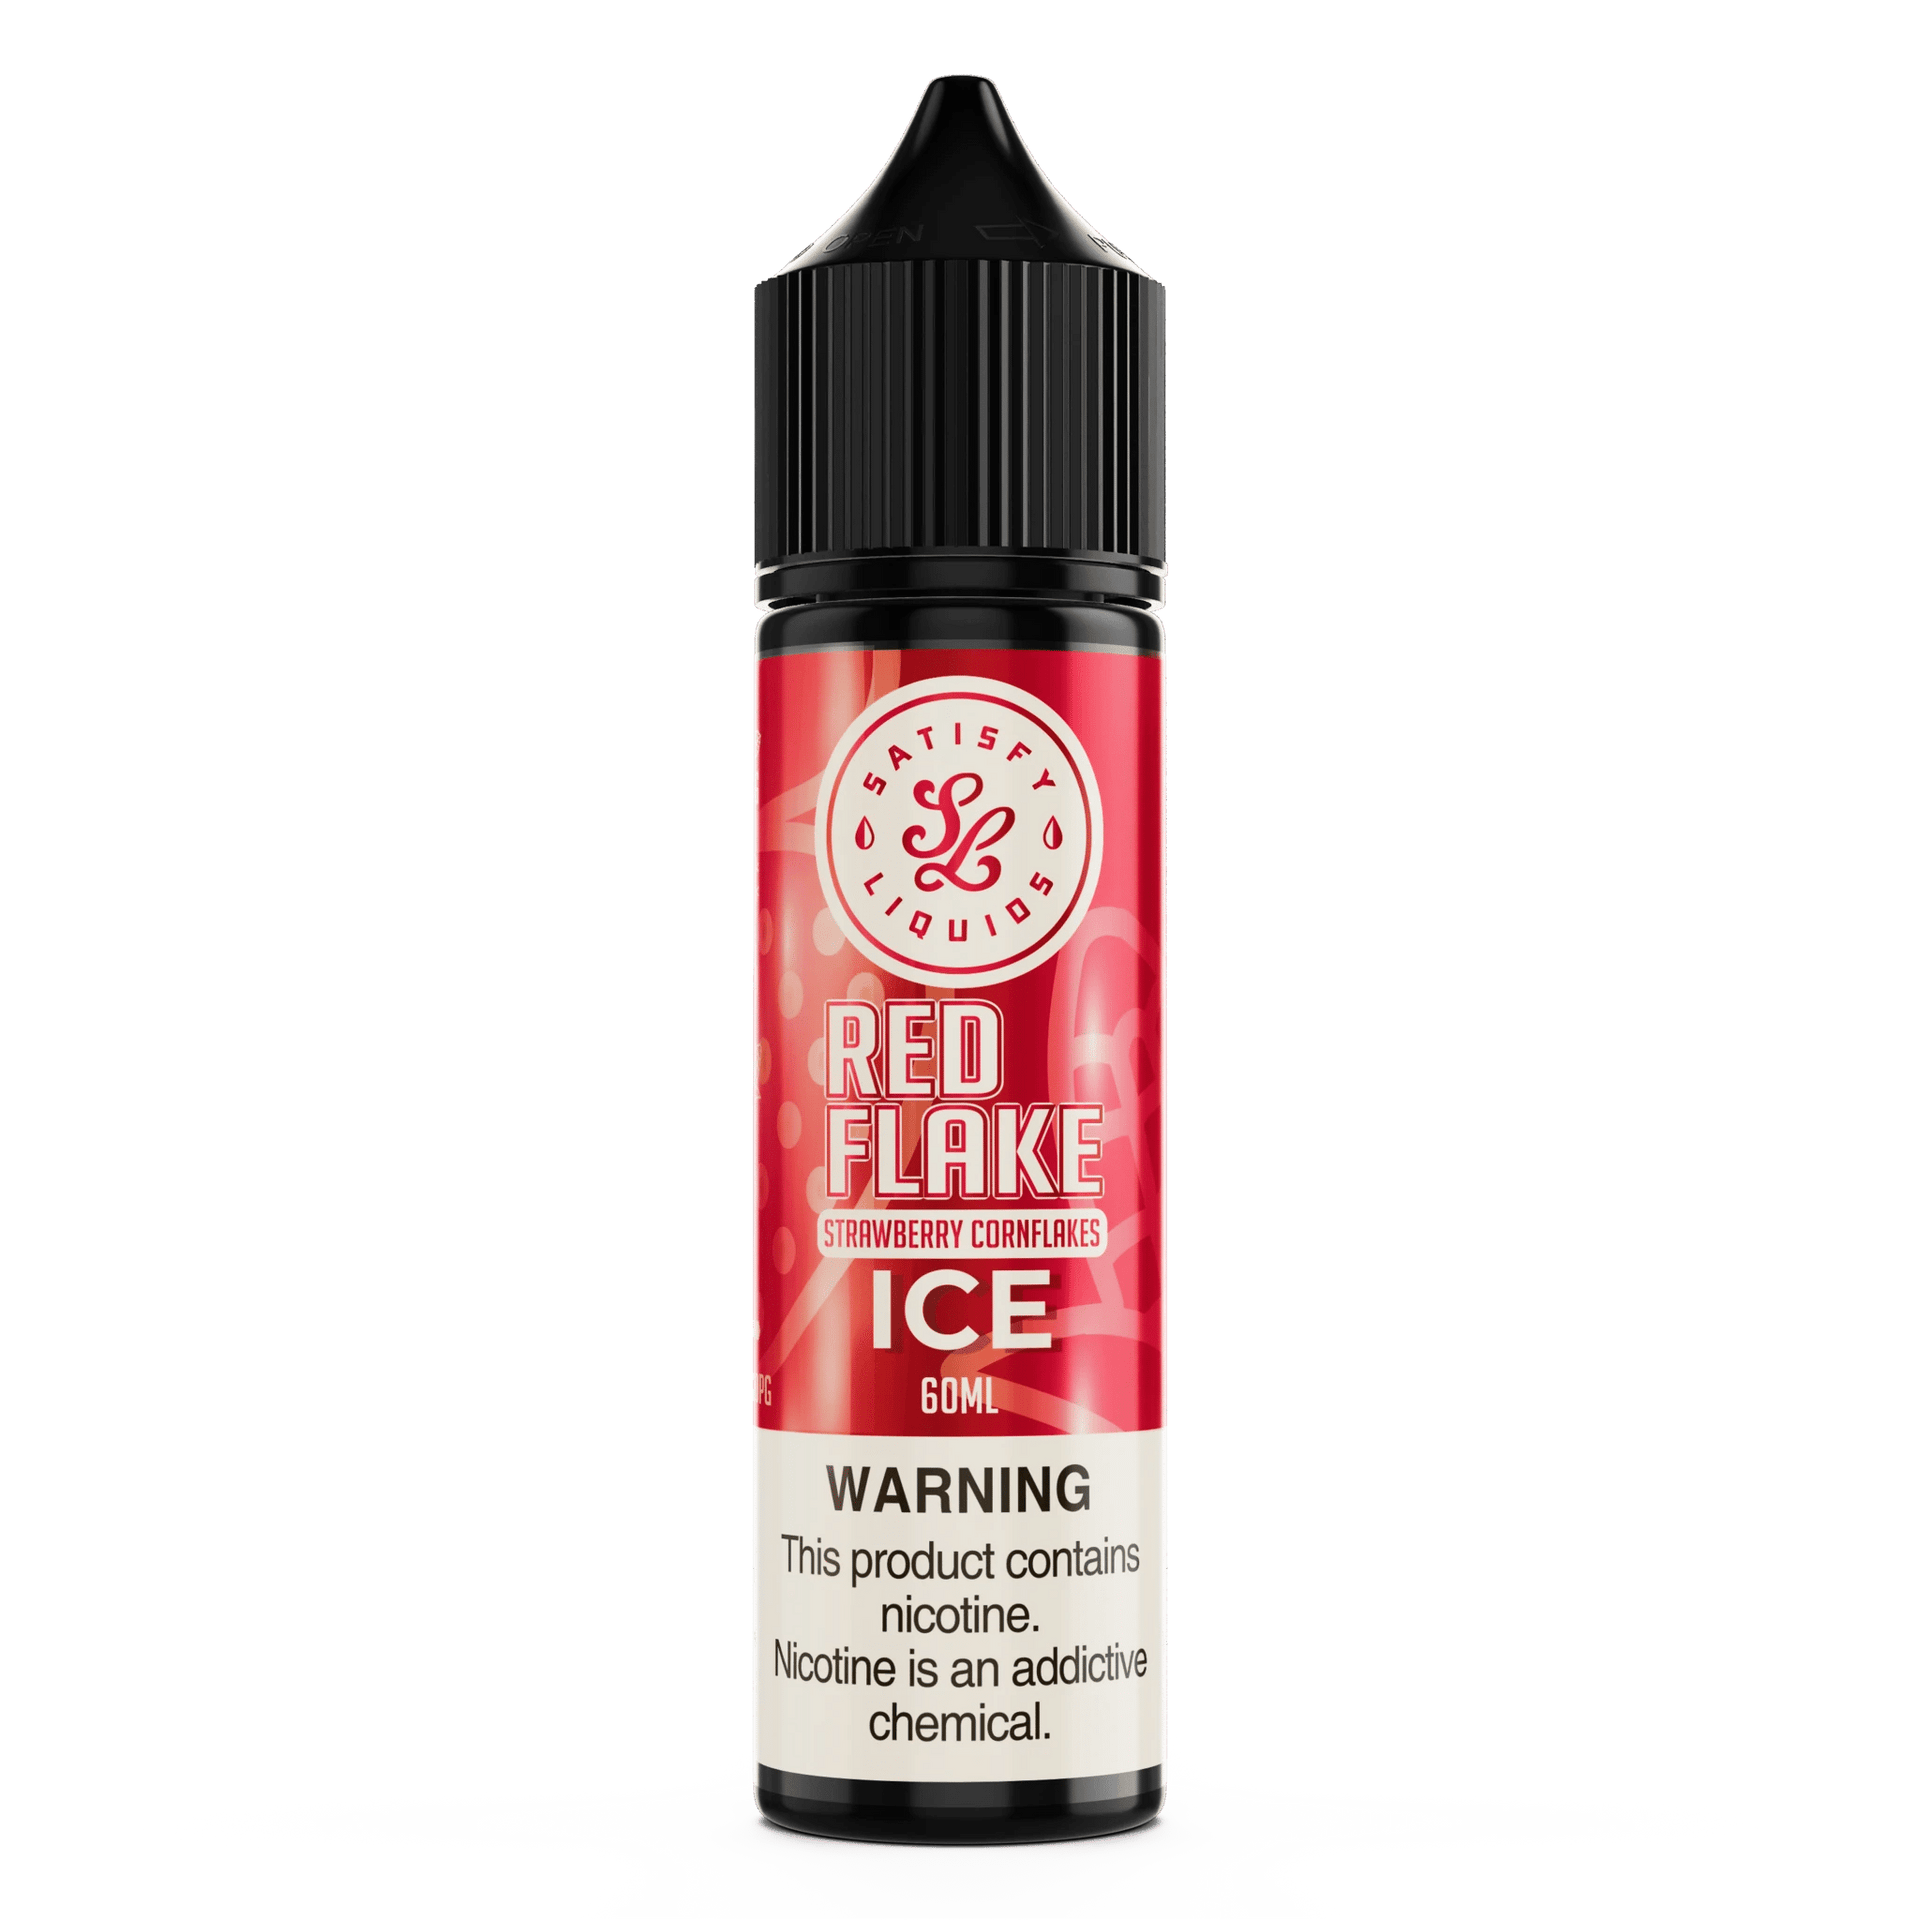 Red Flake Ice 60ml - Satisfy